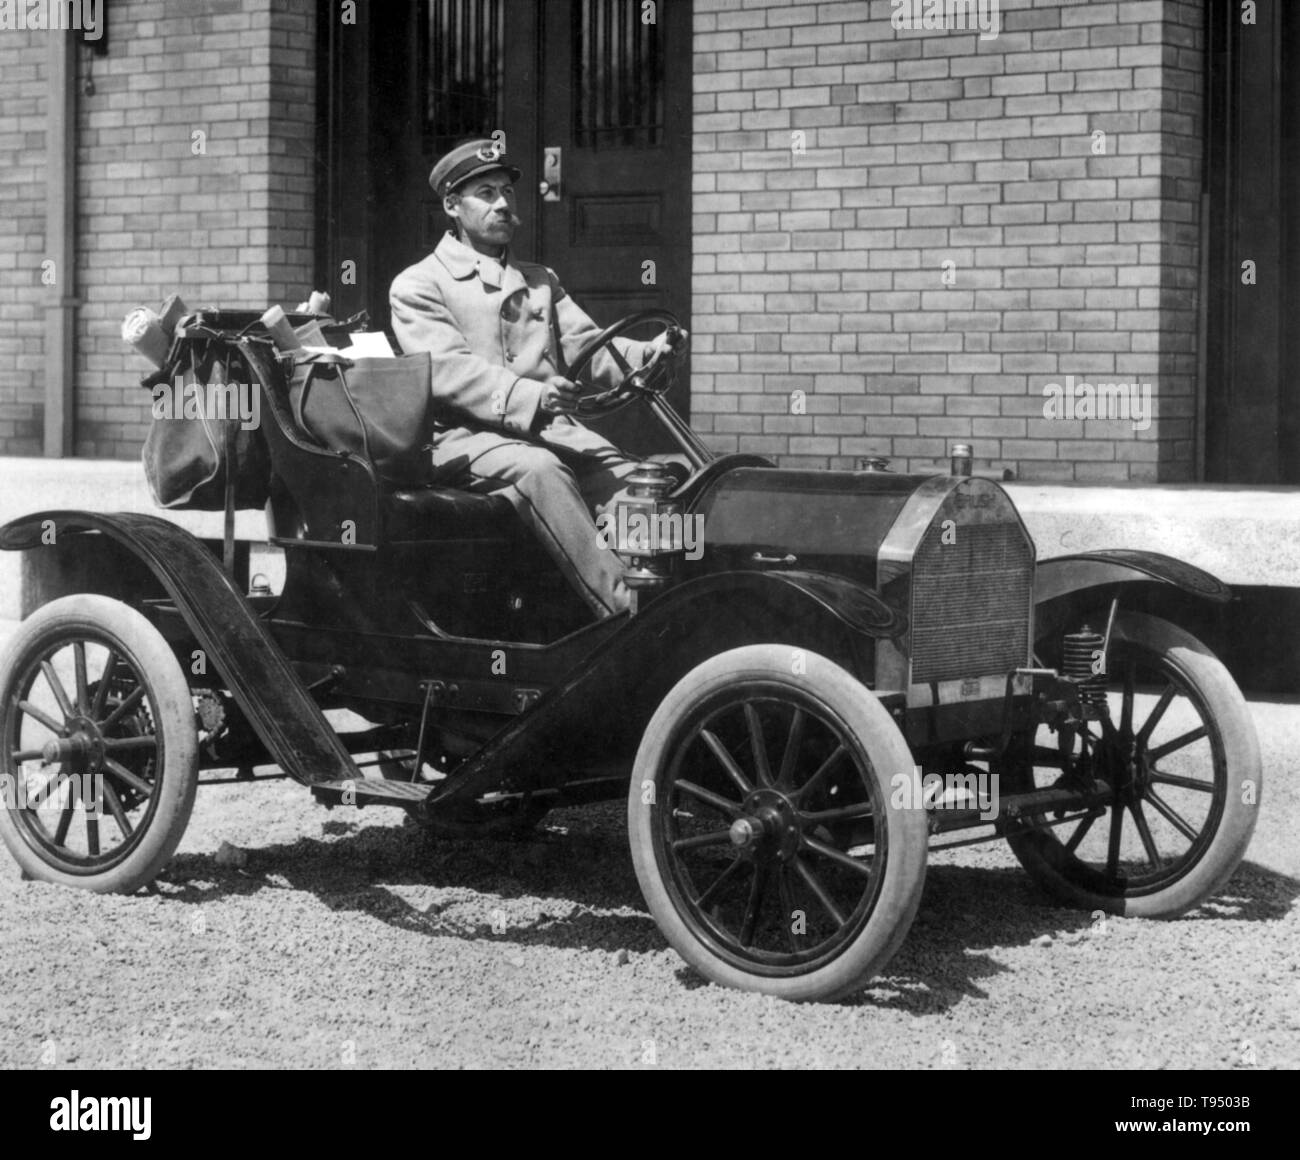 At the turn of the 20th century, the production of automobiles in the United States was divided almost equally among electric-, steam-, and gasoline-powered models. The Post Office Department tried all three types for mail collection in cities. Although more expensive than horse-drawn vehicles, motor vehicles were able to cover the same distance in less than half the time and were gradually adopted by mail transportation contractors. Stock Photo